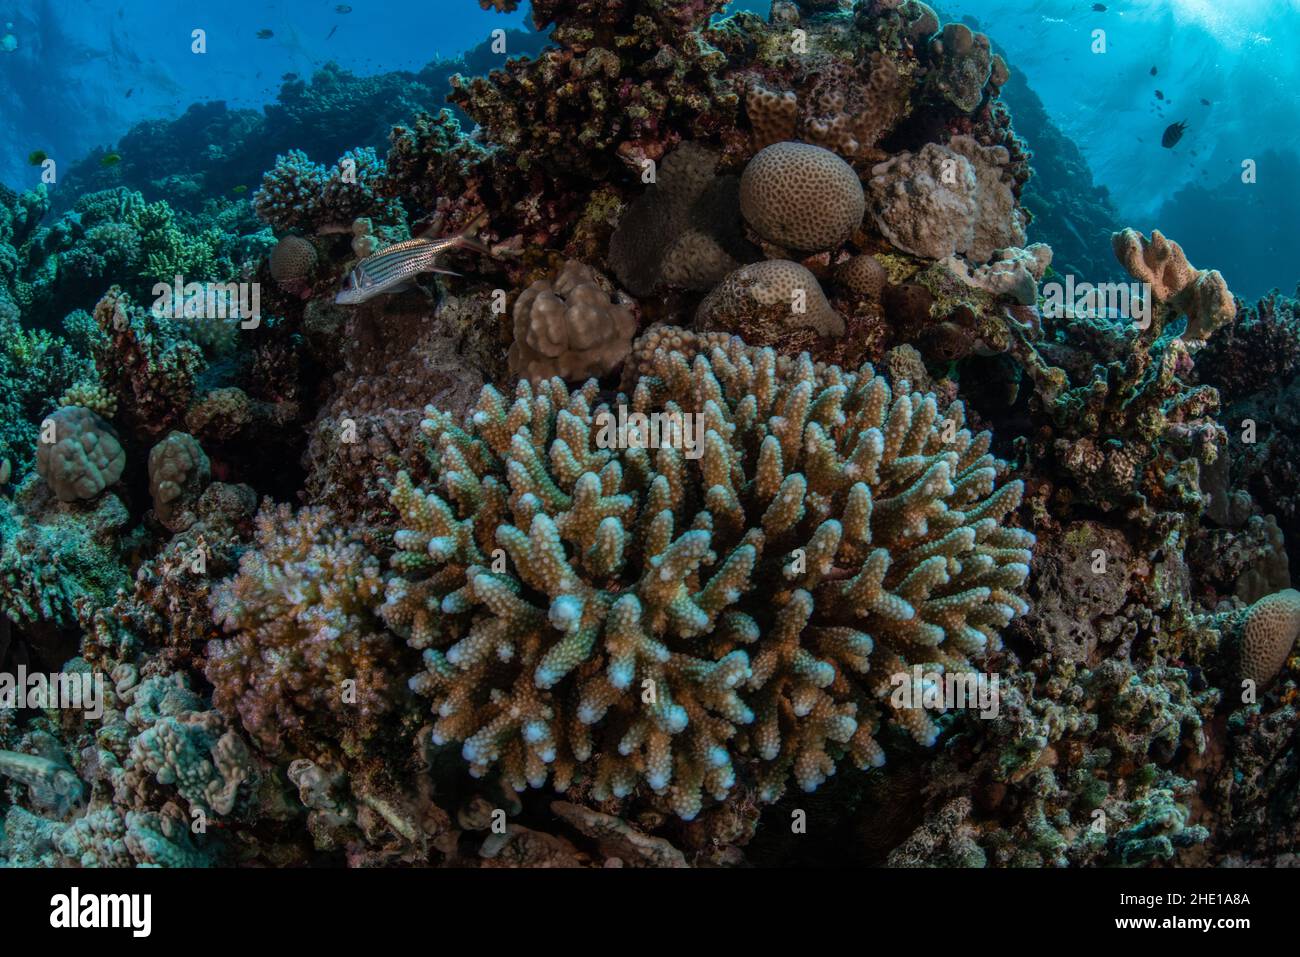 A macro image of a coral reef in the red sea showing several different species of corals. Stock Photo